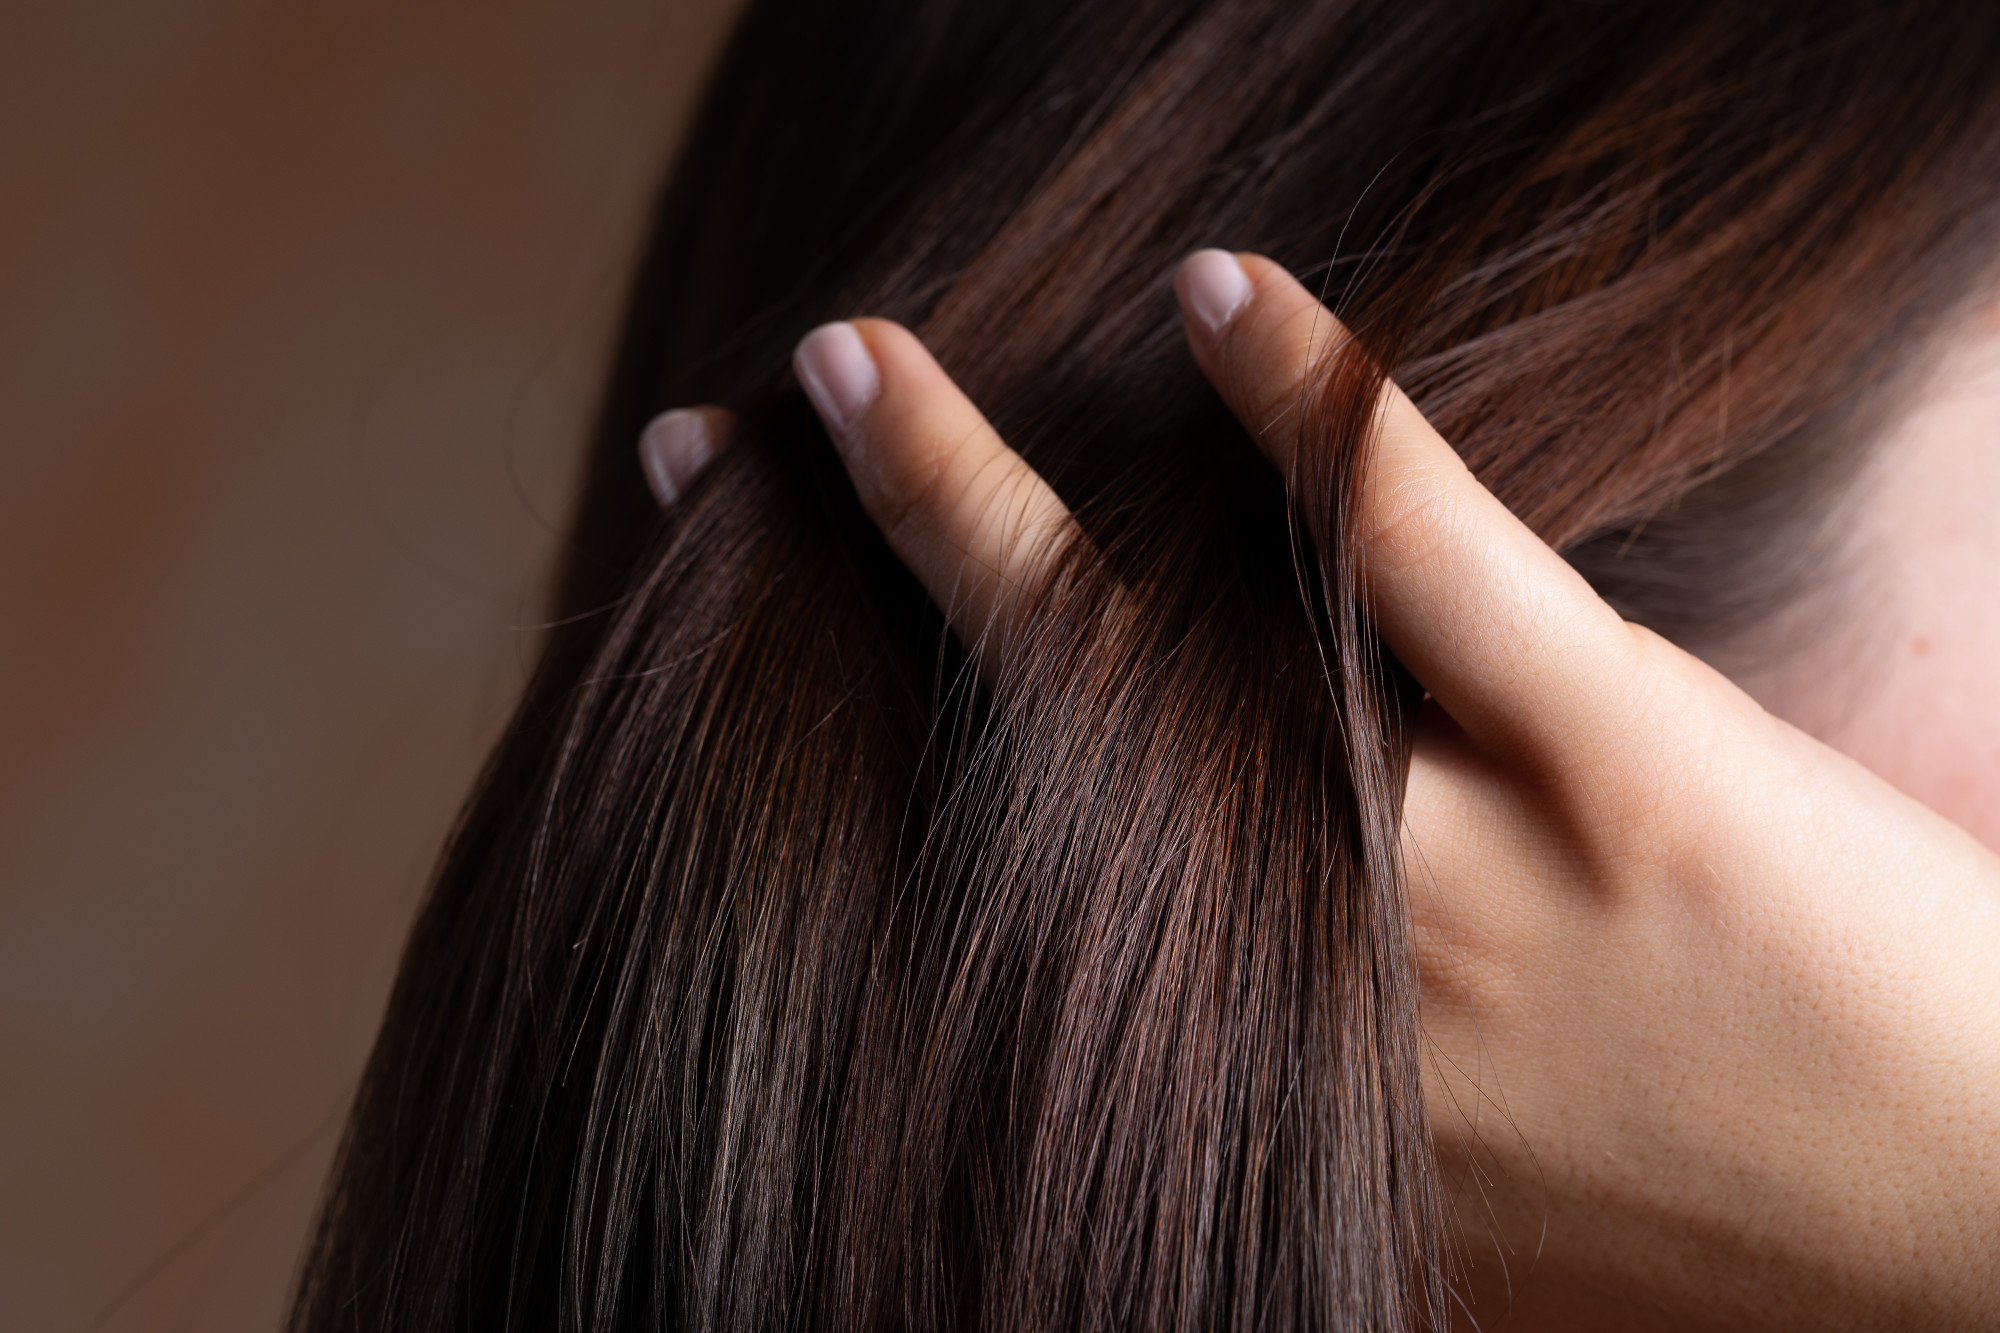 7 Common Hair Styling Errors and How to Avoid Them